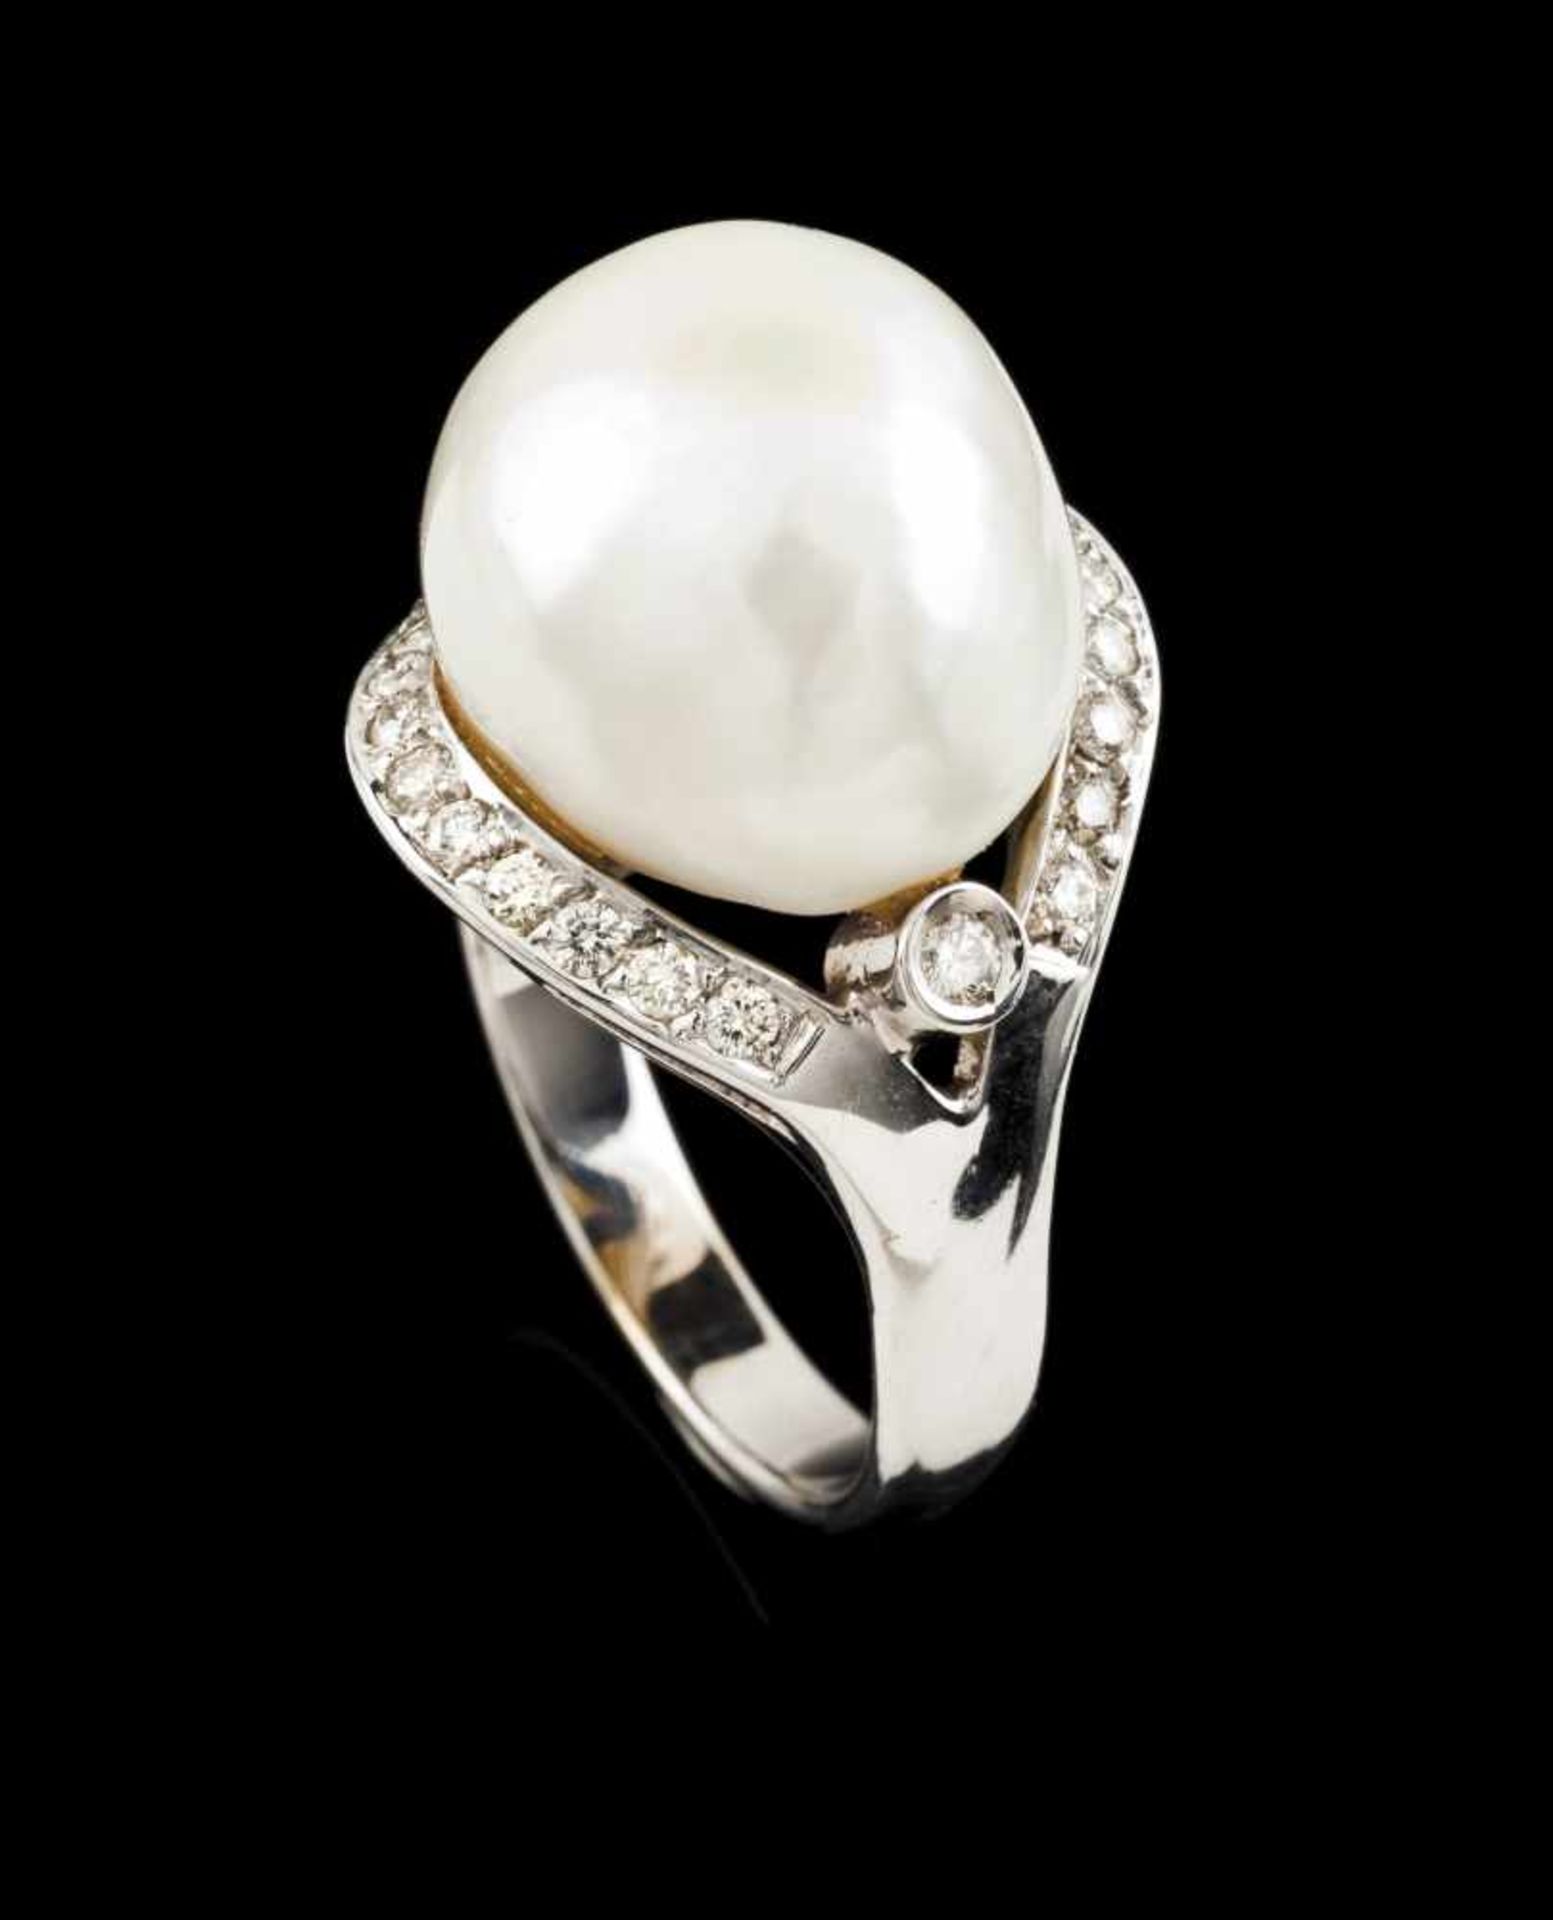 A ringPortuguese gold Set with baroque pearl (ca. 15mm) framed by small brilliant cut diamonds